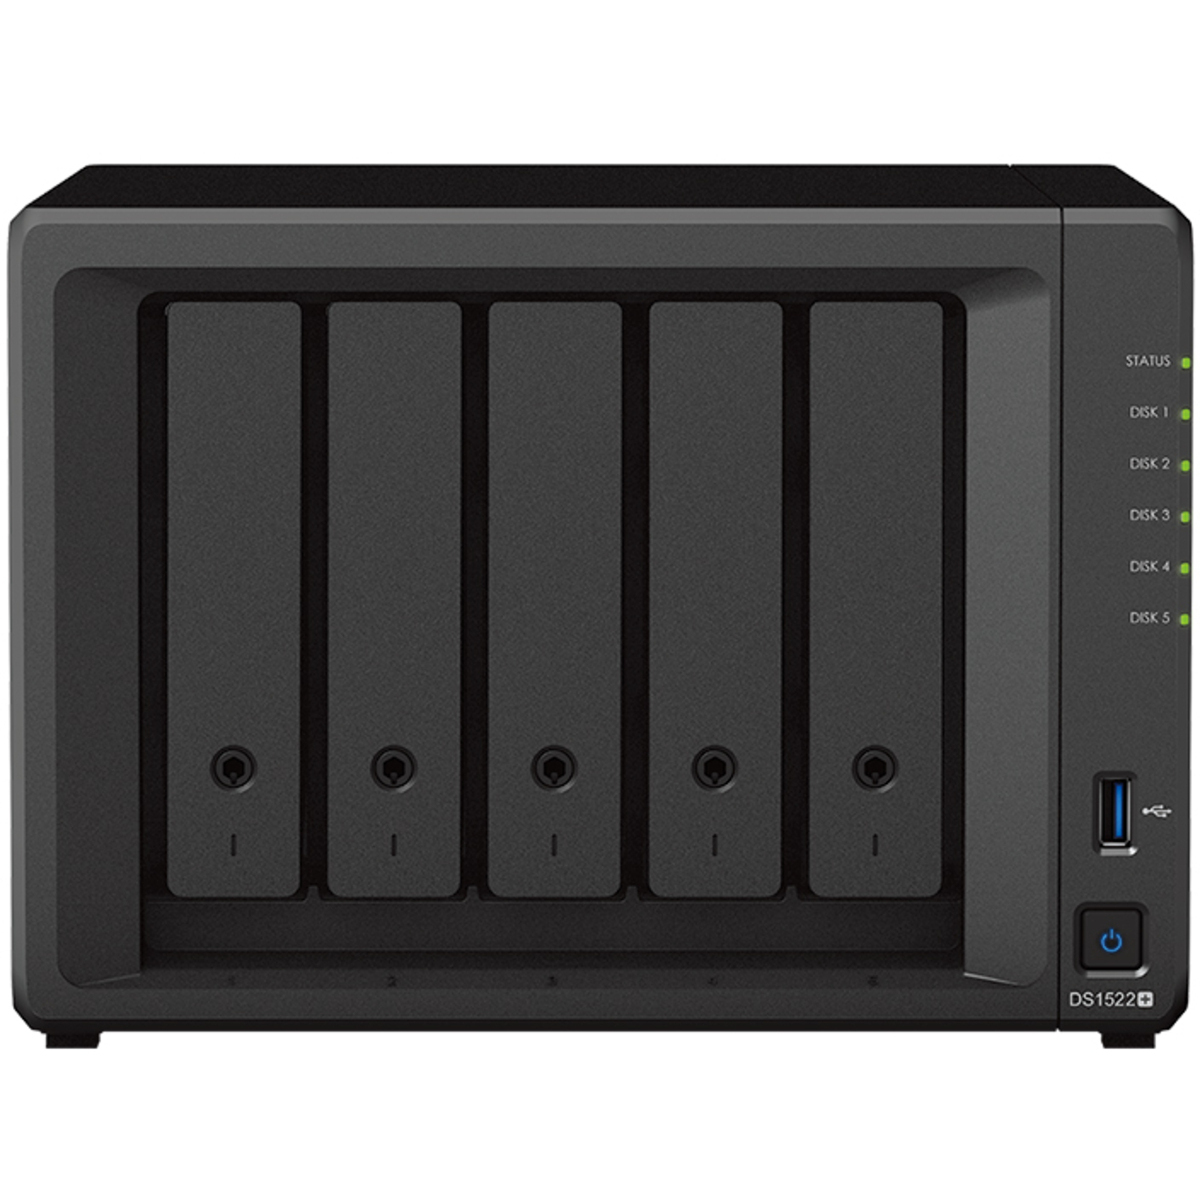 Synology DiskStation DS1522+ 40tb 5-Bay Desktop Multimedia / Power User / Business NAS - Network Attached Storage Device 5x8tb Seagate IronWolf Pro ST8000NT001 3.5 7200rpm SATA 6Gb/s HDD NAS Class Drives Installed - Burn-In Tested - ON SALE DiskStation DS1522+